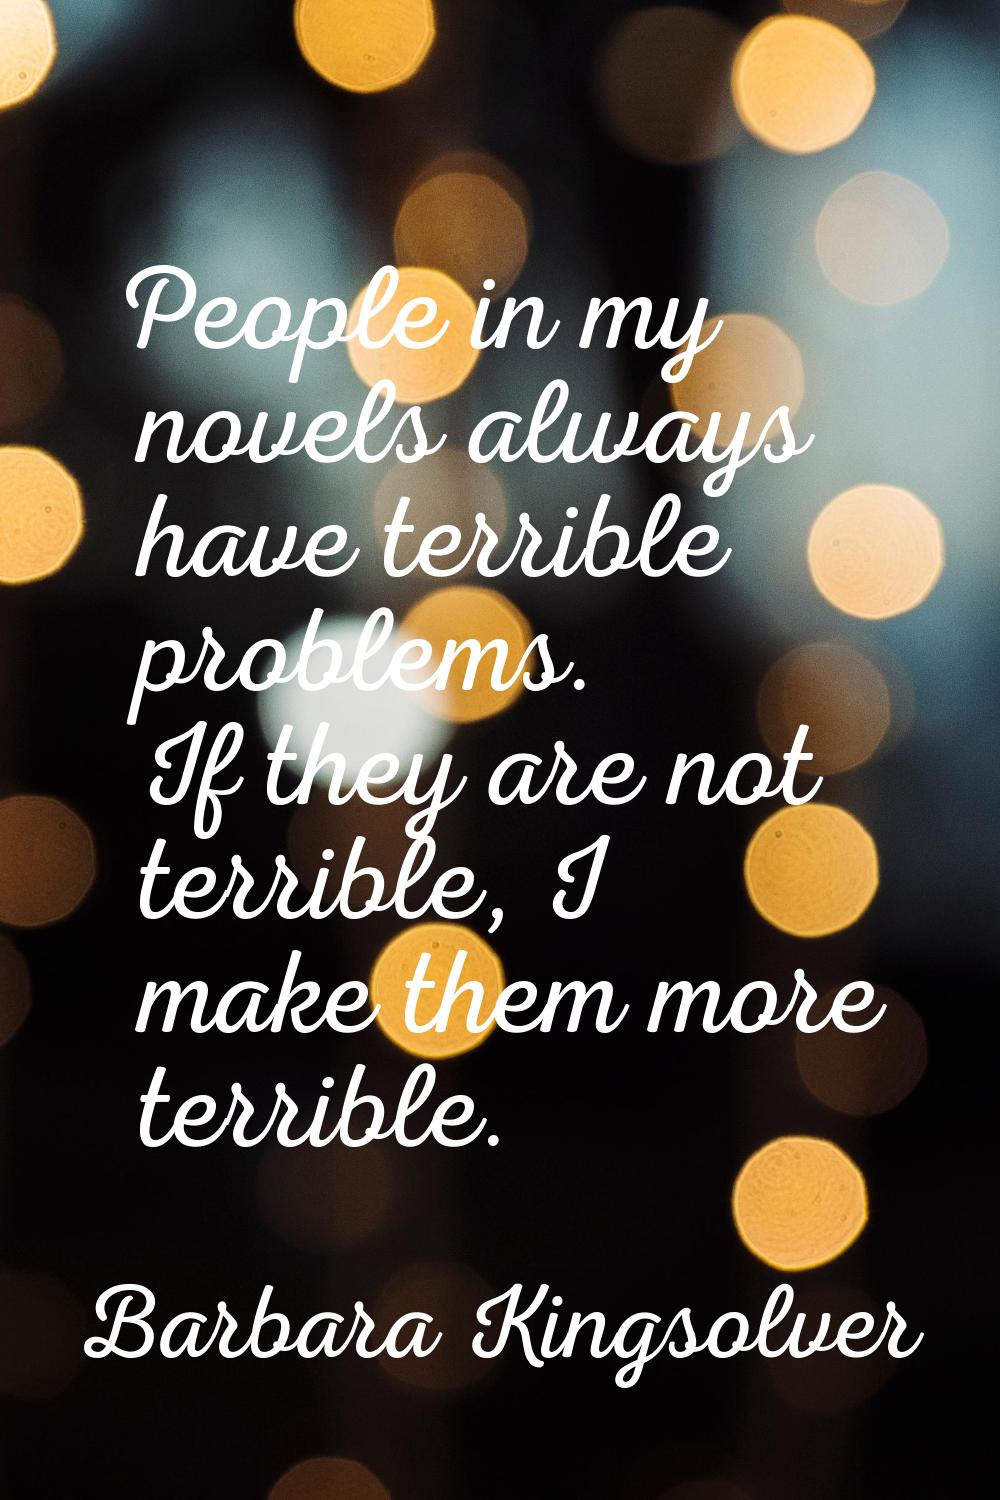 People in my novels always have terrible problems. If they are not terrible, I make them more terri